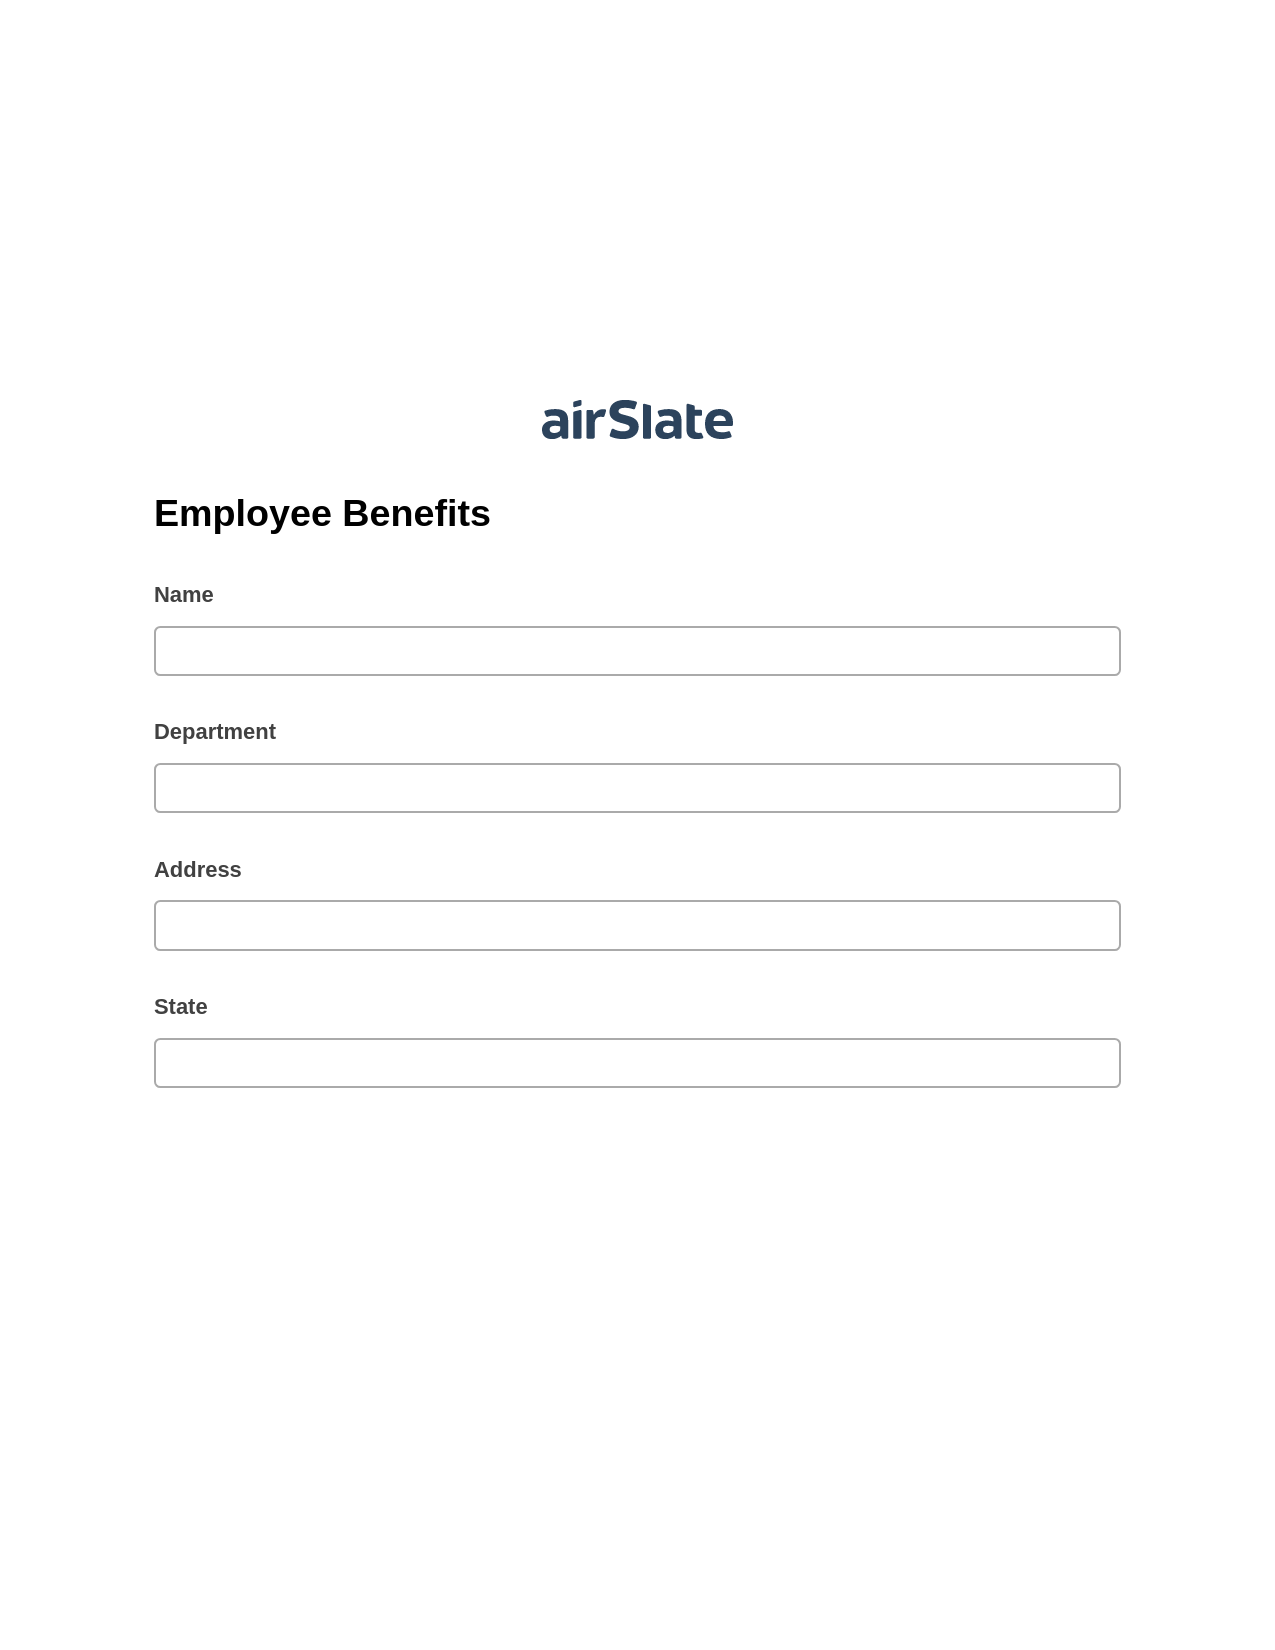 Employee Benefits Pre-fill Dropdowns from CSV File Bot, Pre-fill with Custom Data Bot, Slack Two-Way Binding Bot